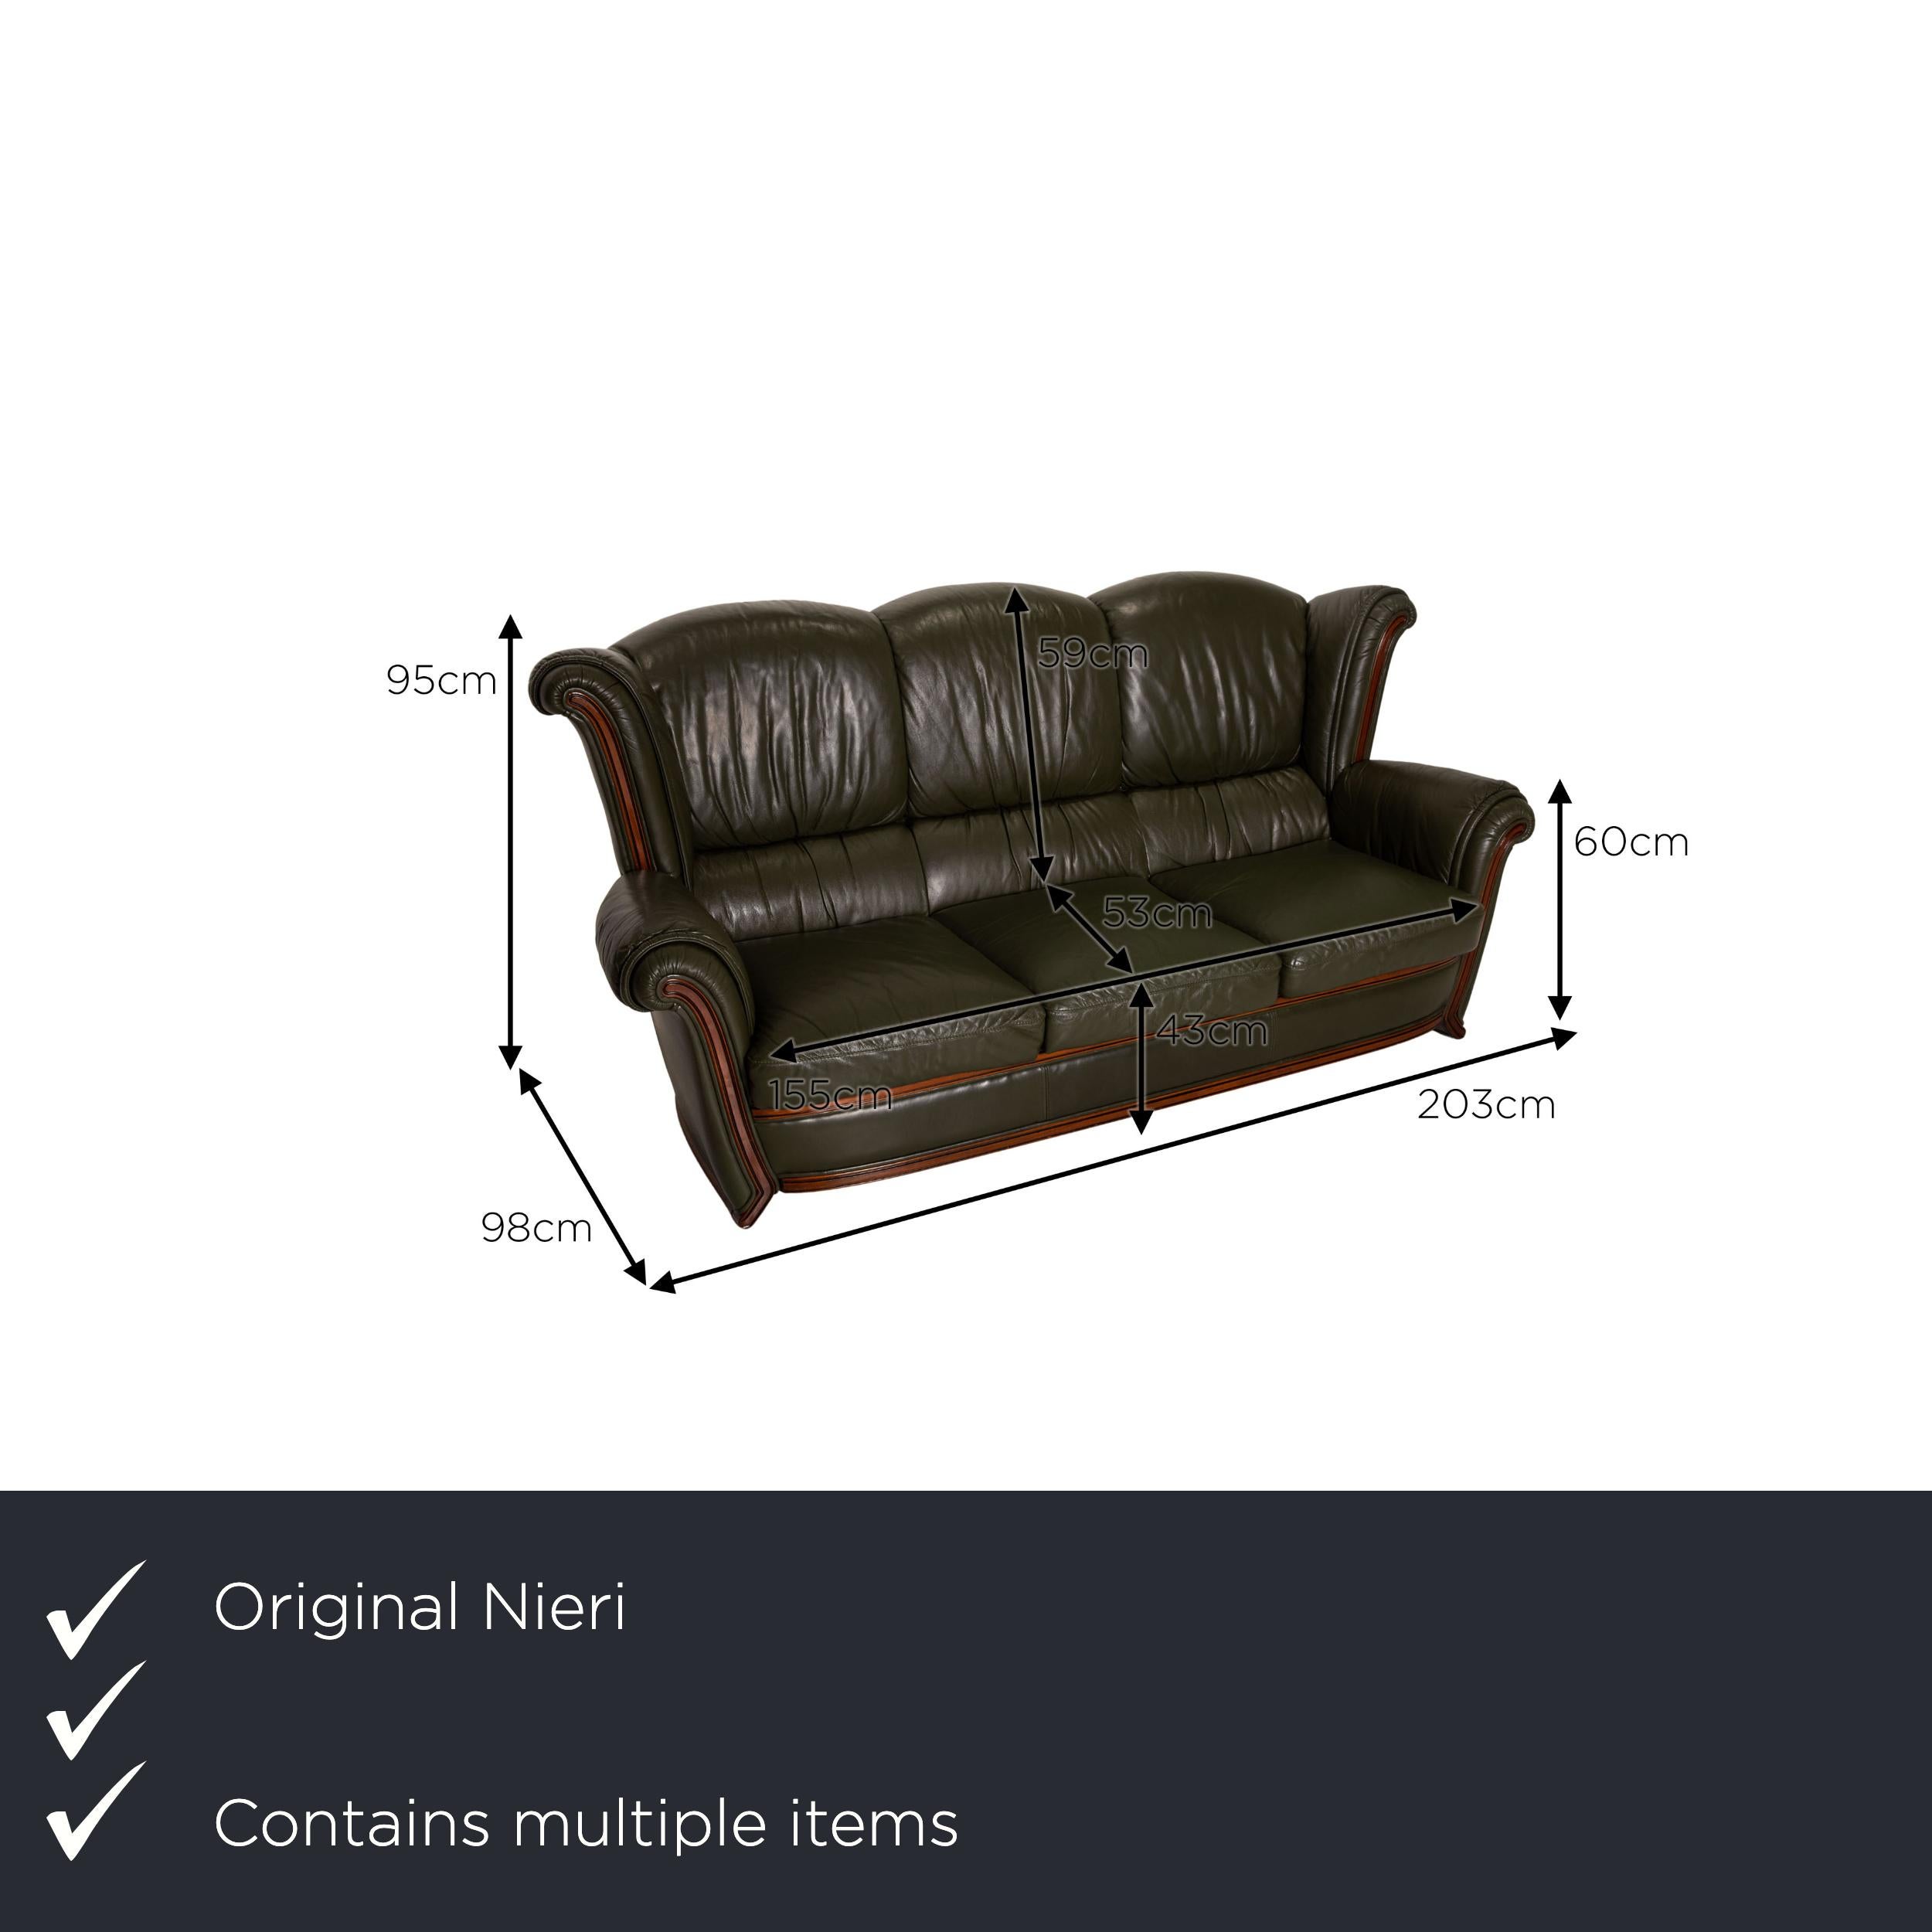 We present to you a Nieri leather sofa set dark green three-seater two-seater couch.

Product measurements in centimeters:

depth: 98
width: 203
height: 95
seat height: 43
rest height: 60
seat depth: 53
seat width: 155
back height: